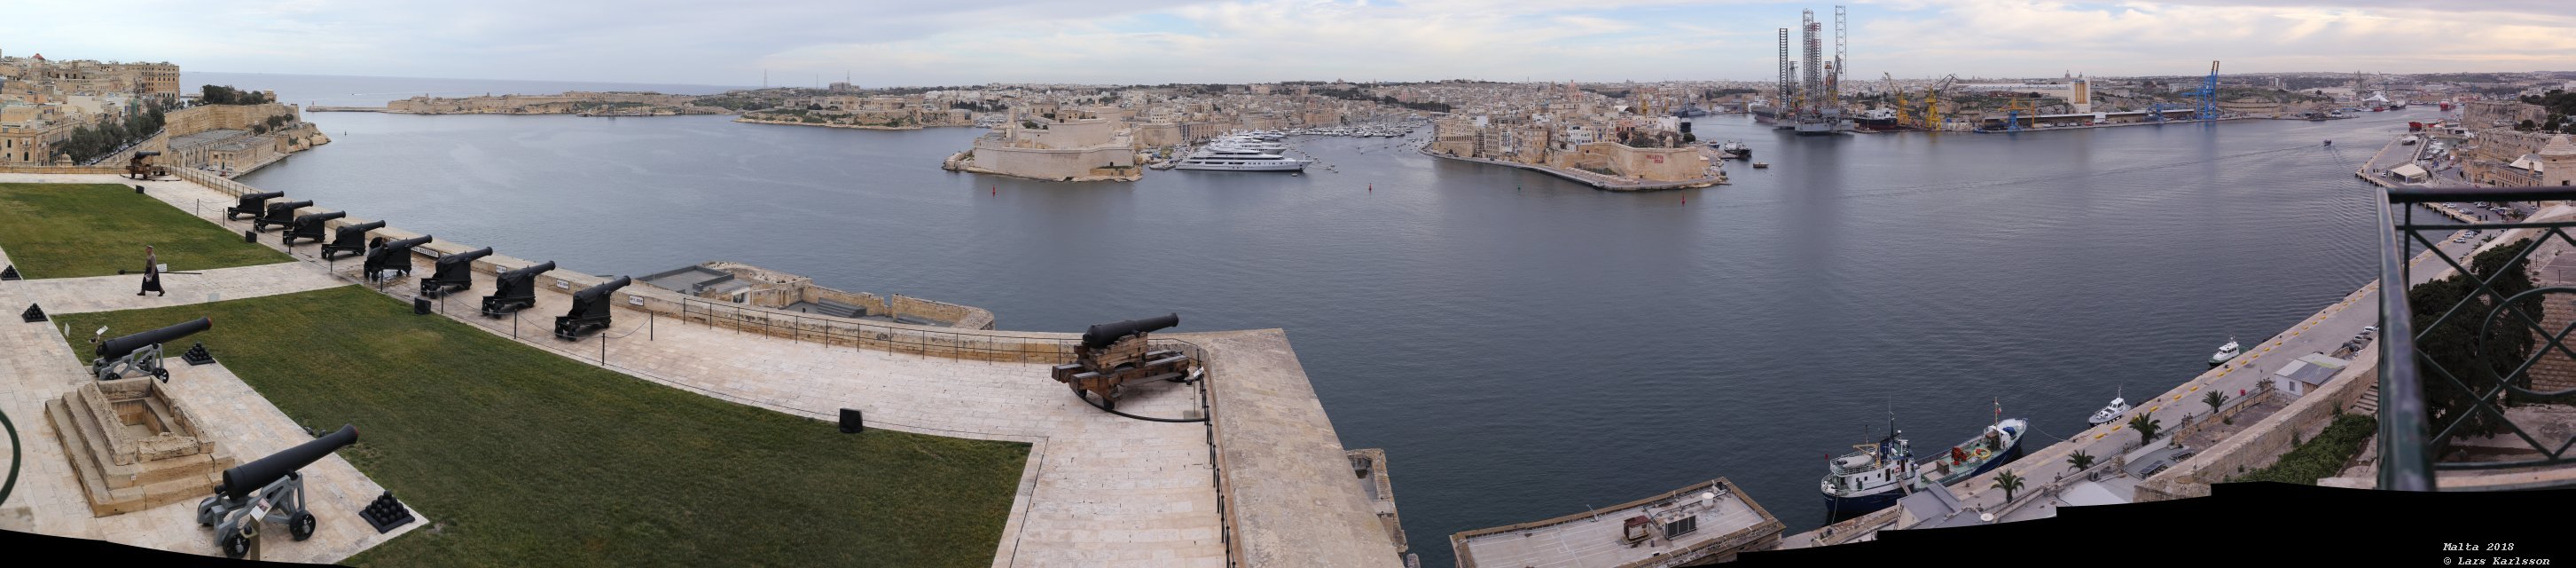 Malta, view over the Three Cities